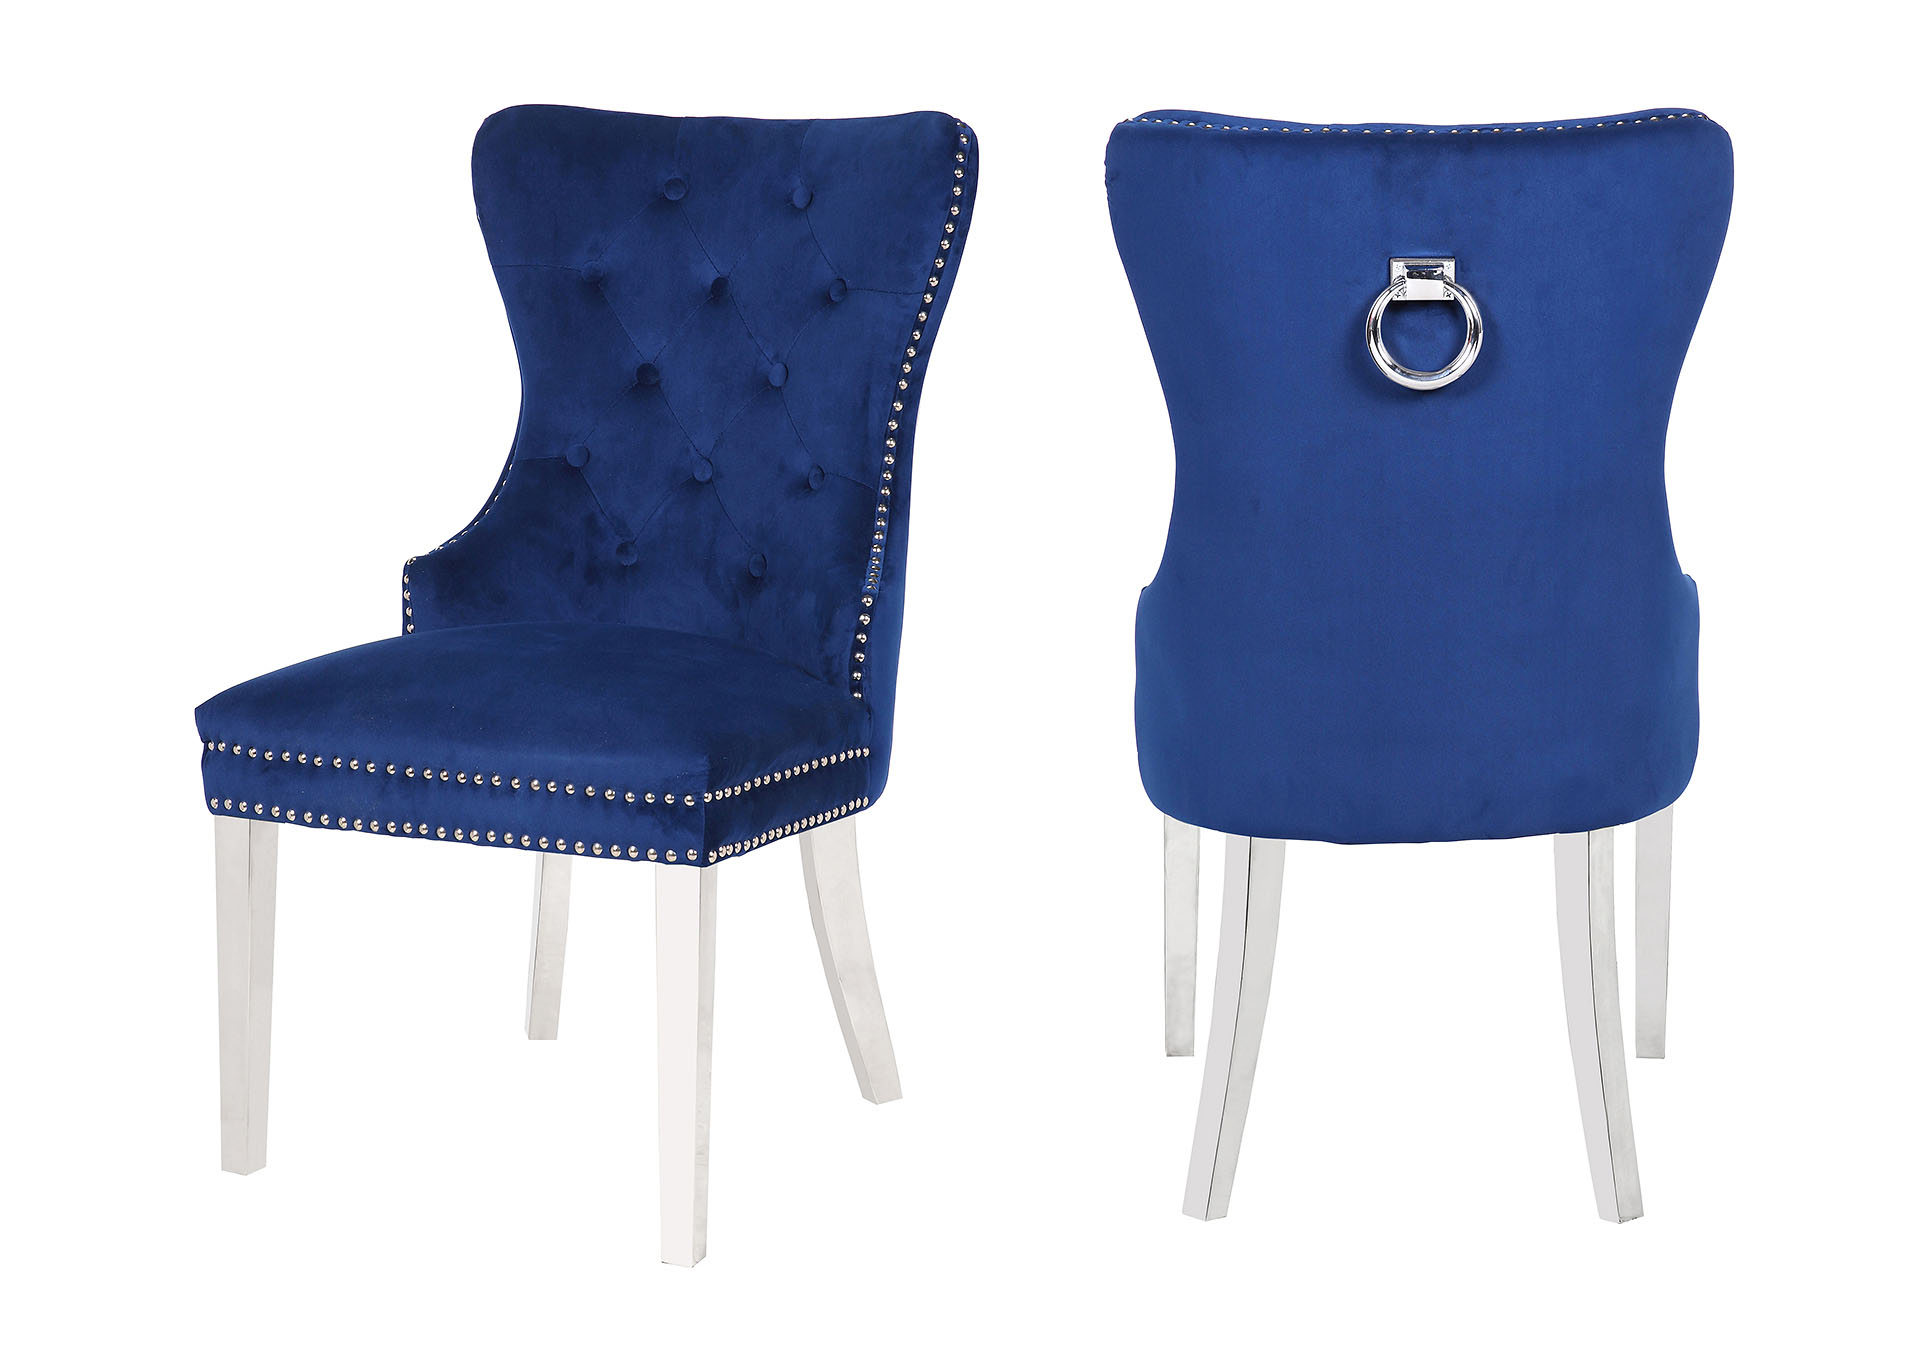 Erica Blue Accent chairs / dining chairs,Galaxy Home Furniture